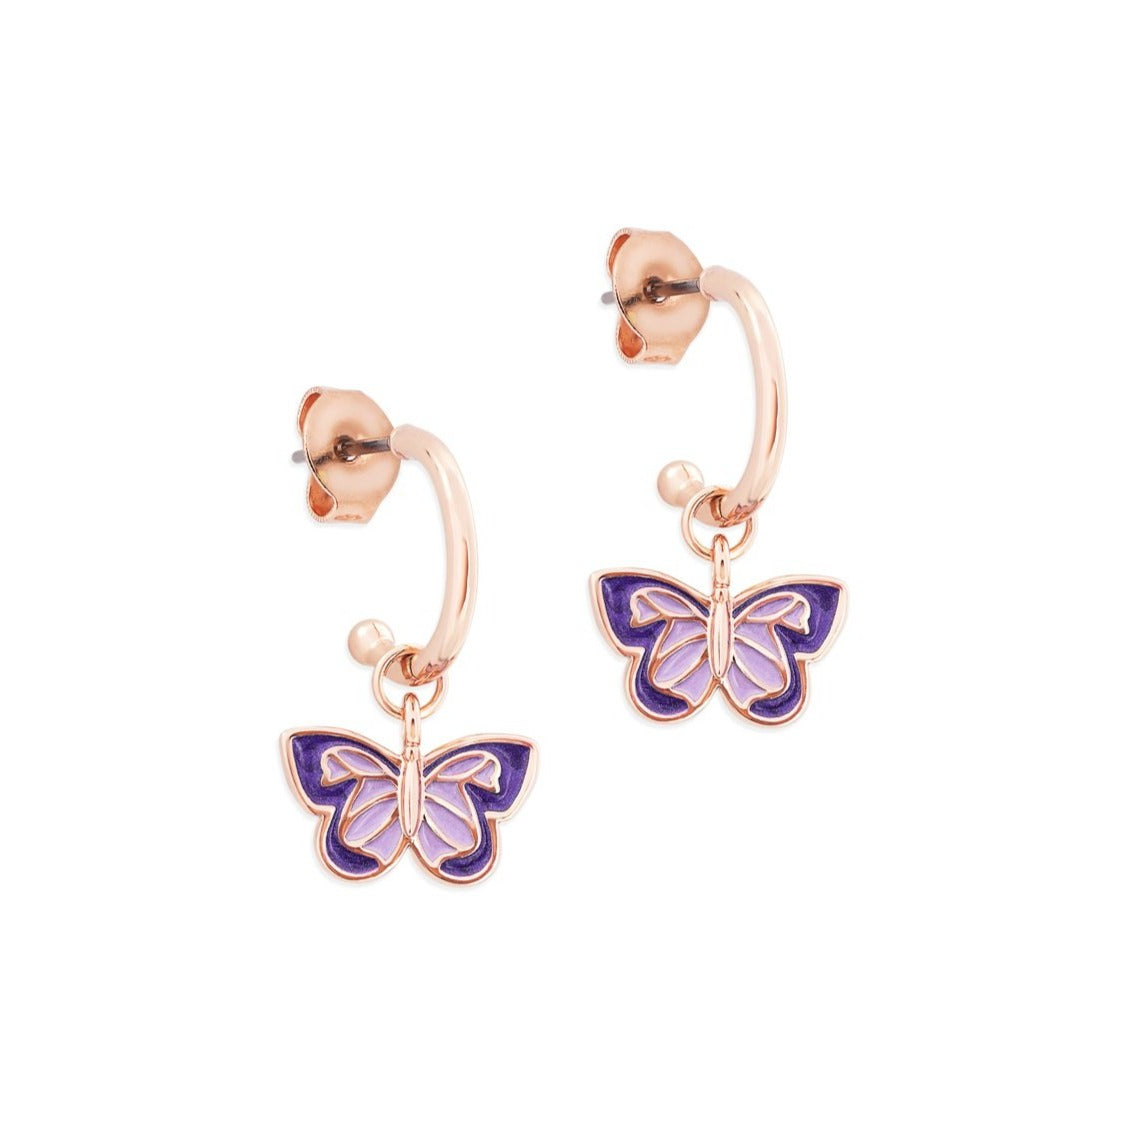 Tipperary Crystal Butterfly Loop Bar Earrings  Crafted in sleek polished rose gold with pearlescent dark purple & lilac enamel infill. These earrings secure comfortably with push backs.